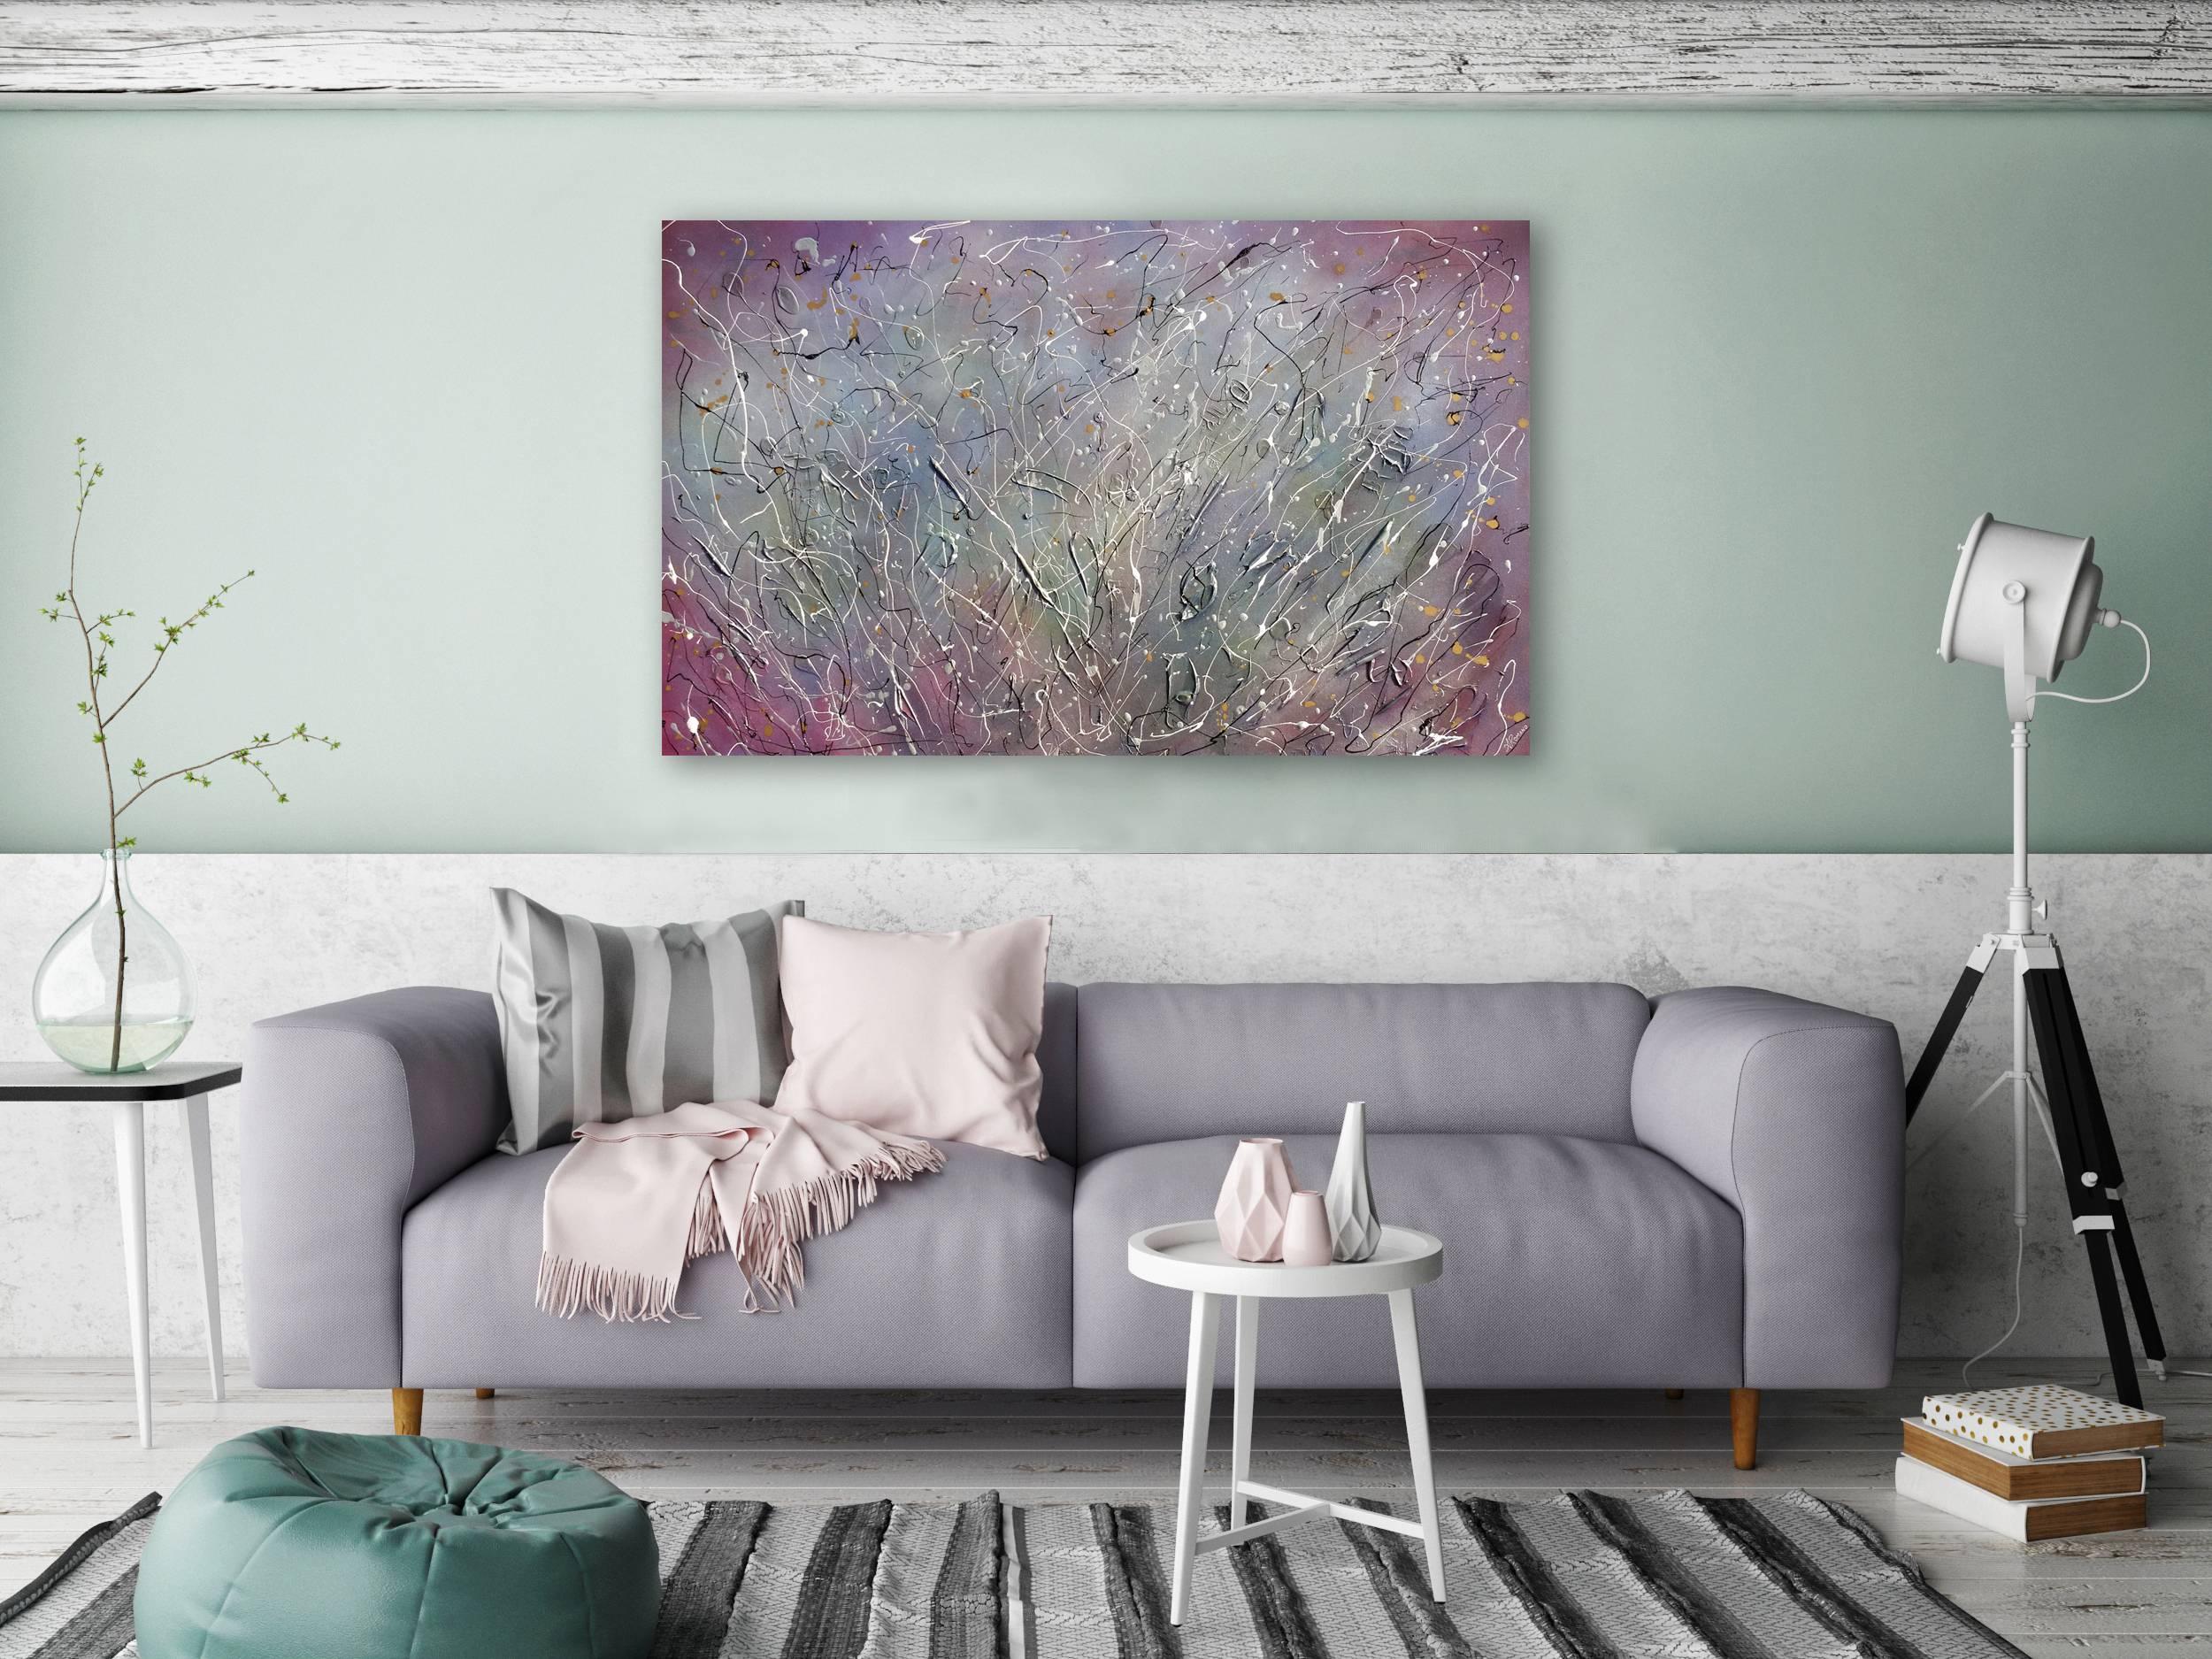 Alexandra Romano was born in Mississauga, near Toronto, Canada.
An abstract artist, she delights in the freedom of abstraction and the ability to explore impressionism and expressionism, which are frequently inspired by nature and incorporate